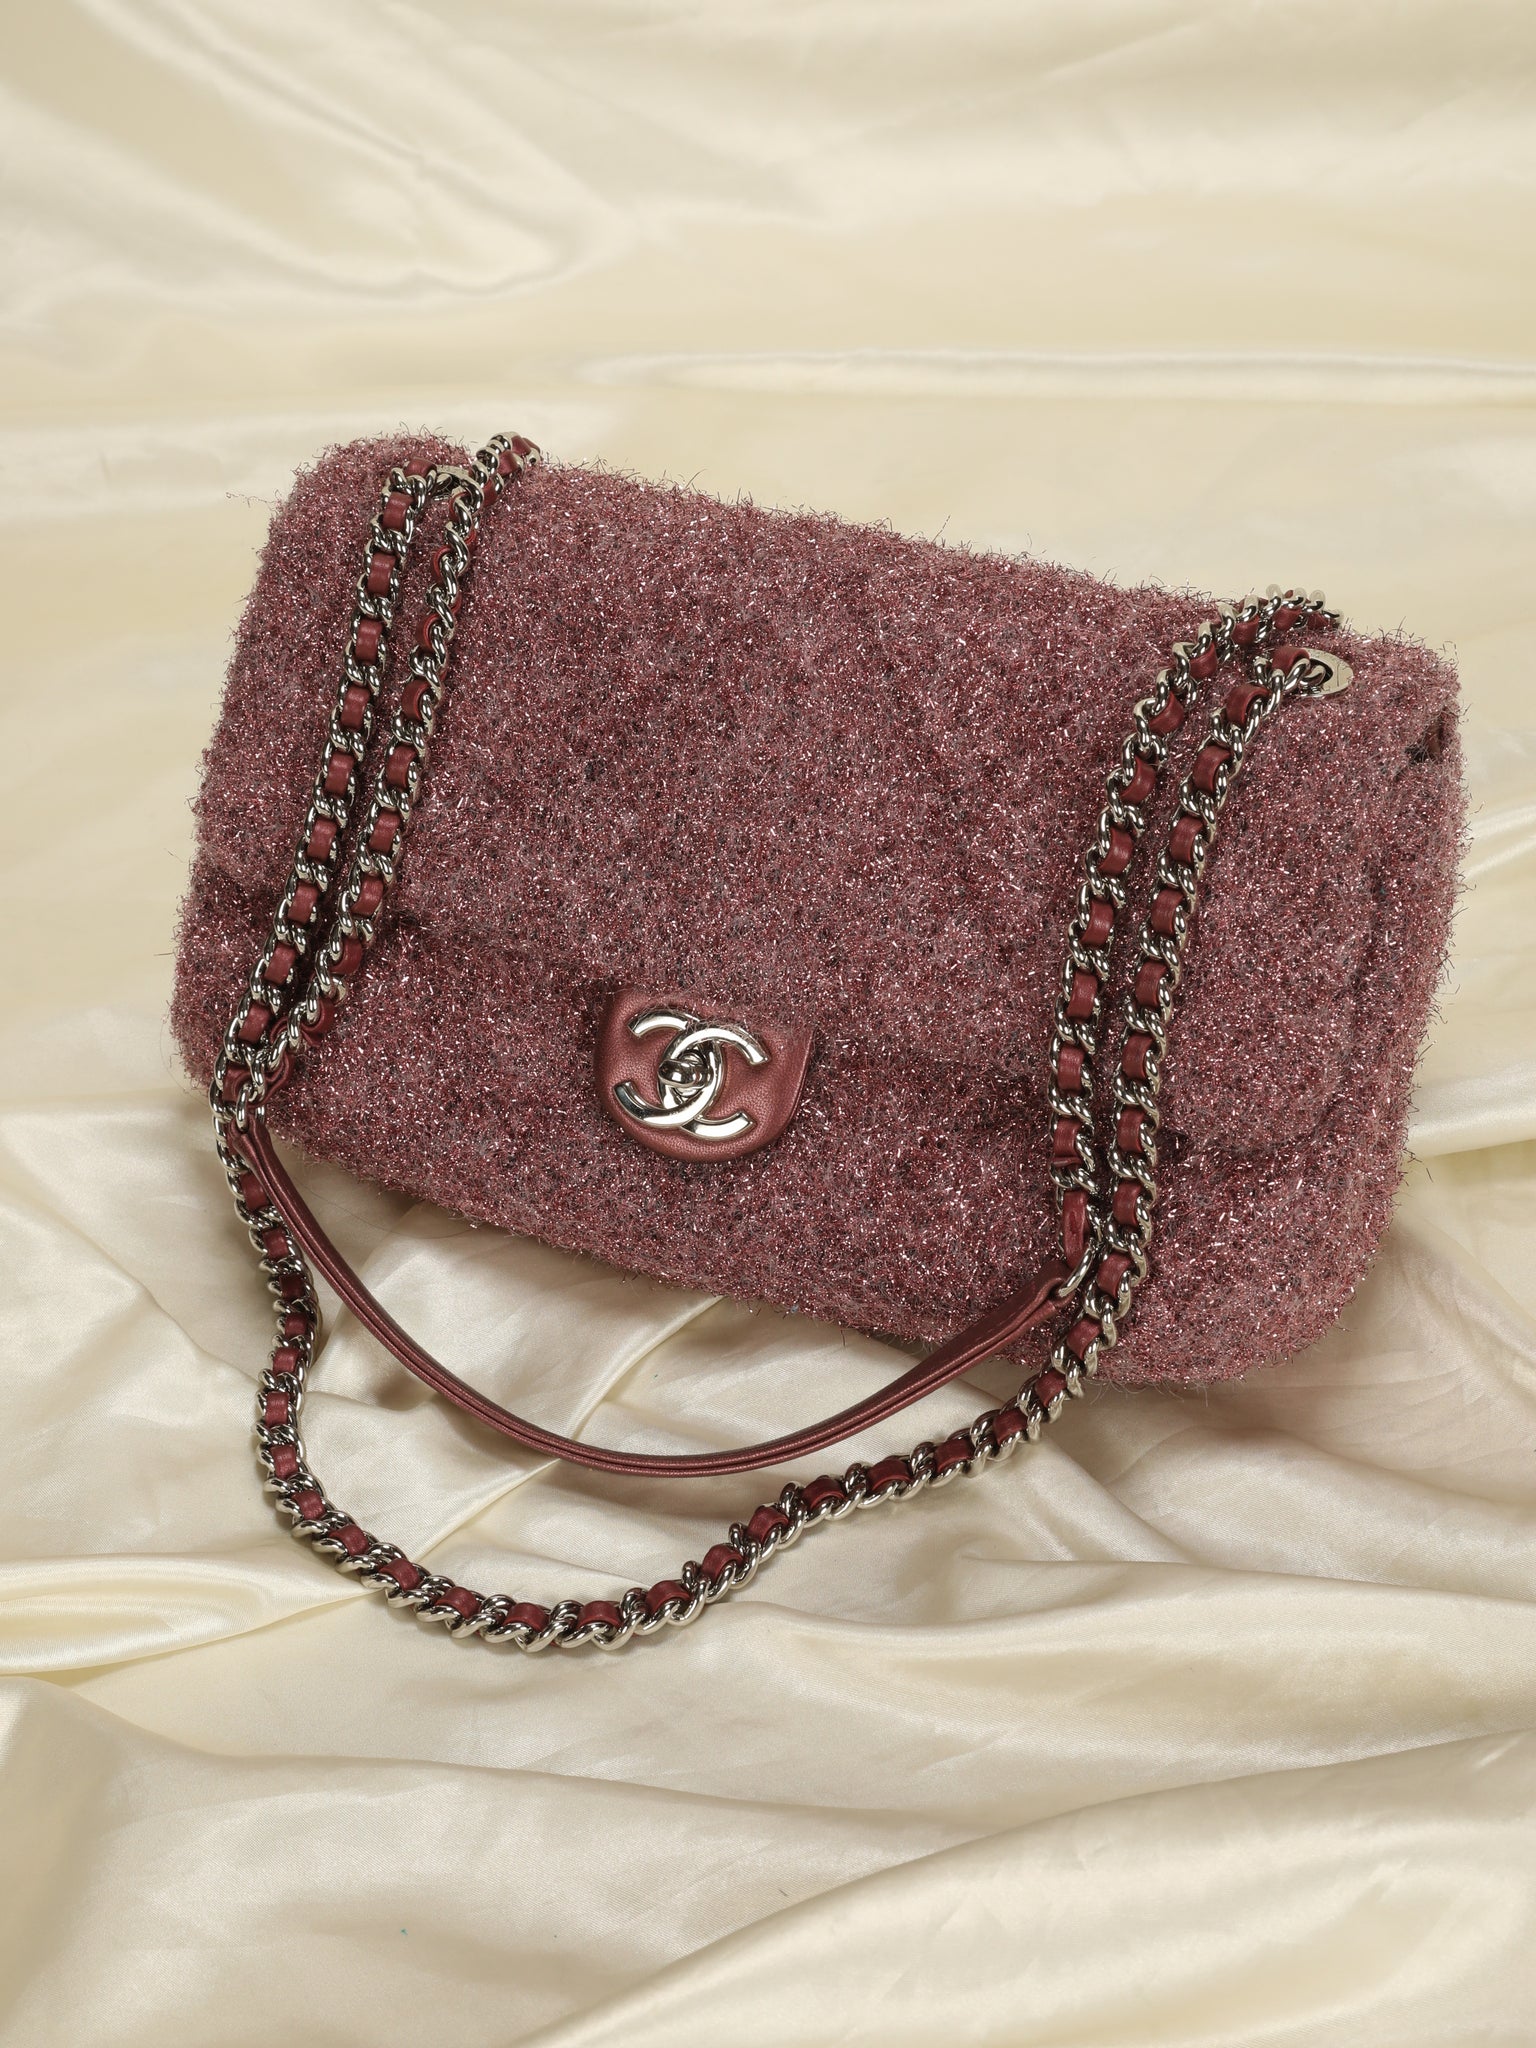 Rare Chanel Quilted Glitzy Flap Bag